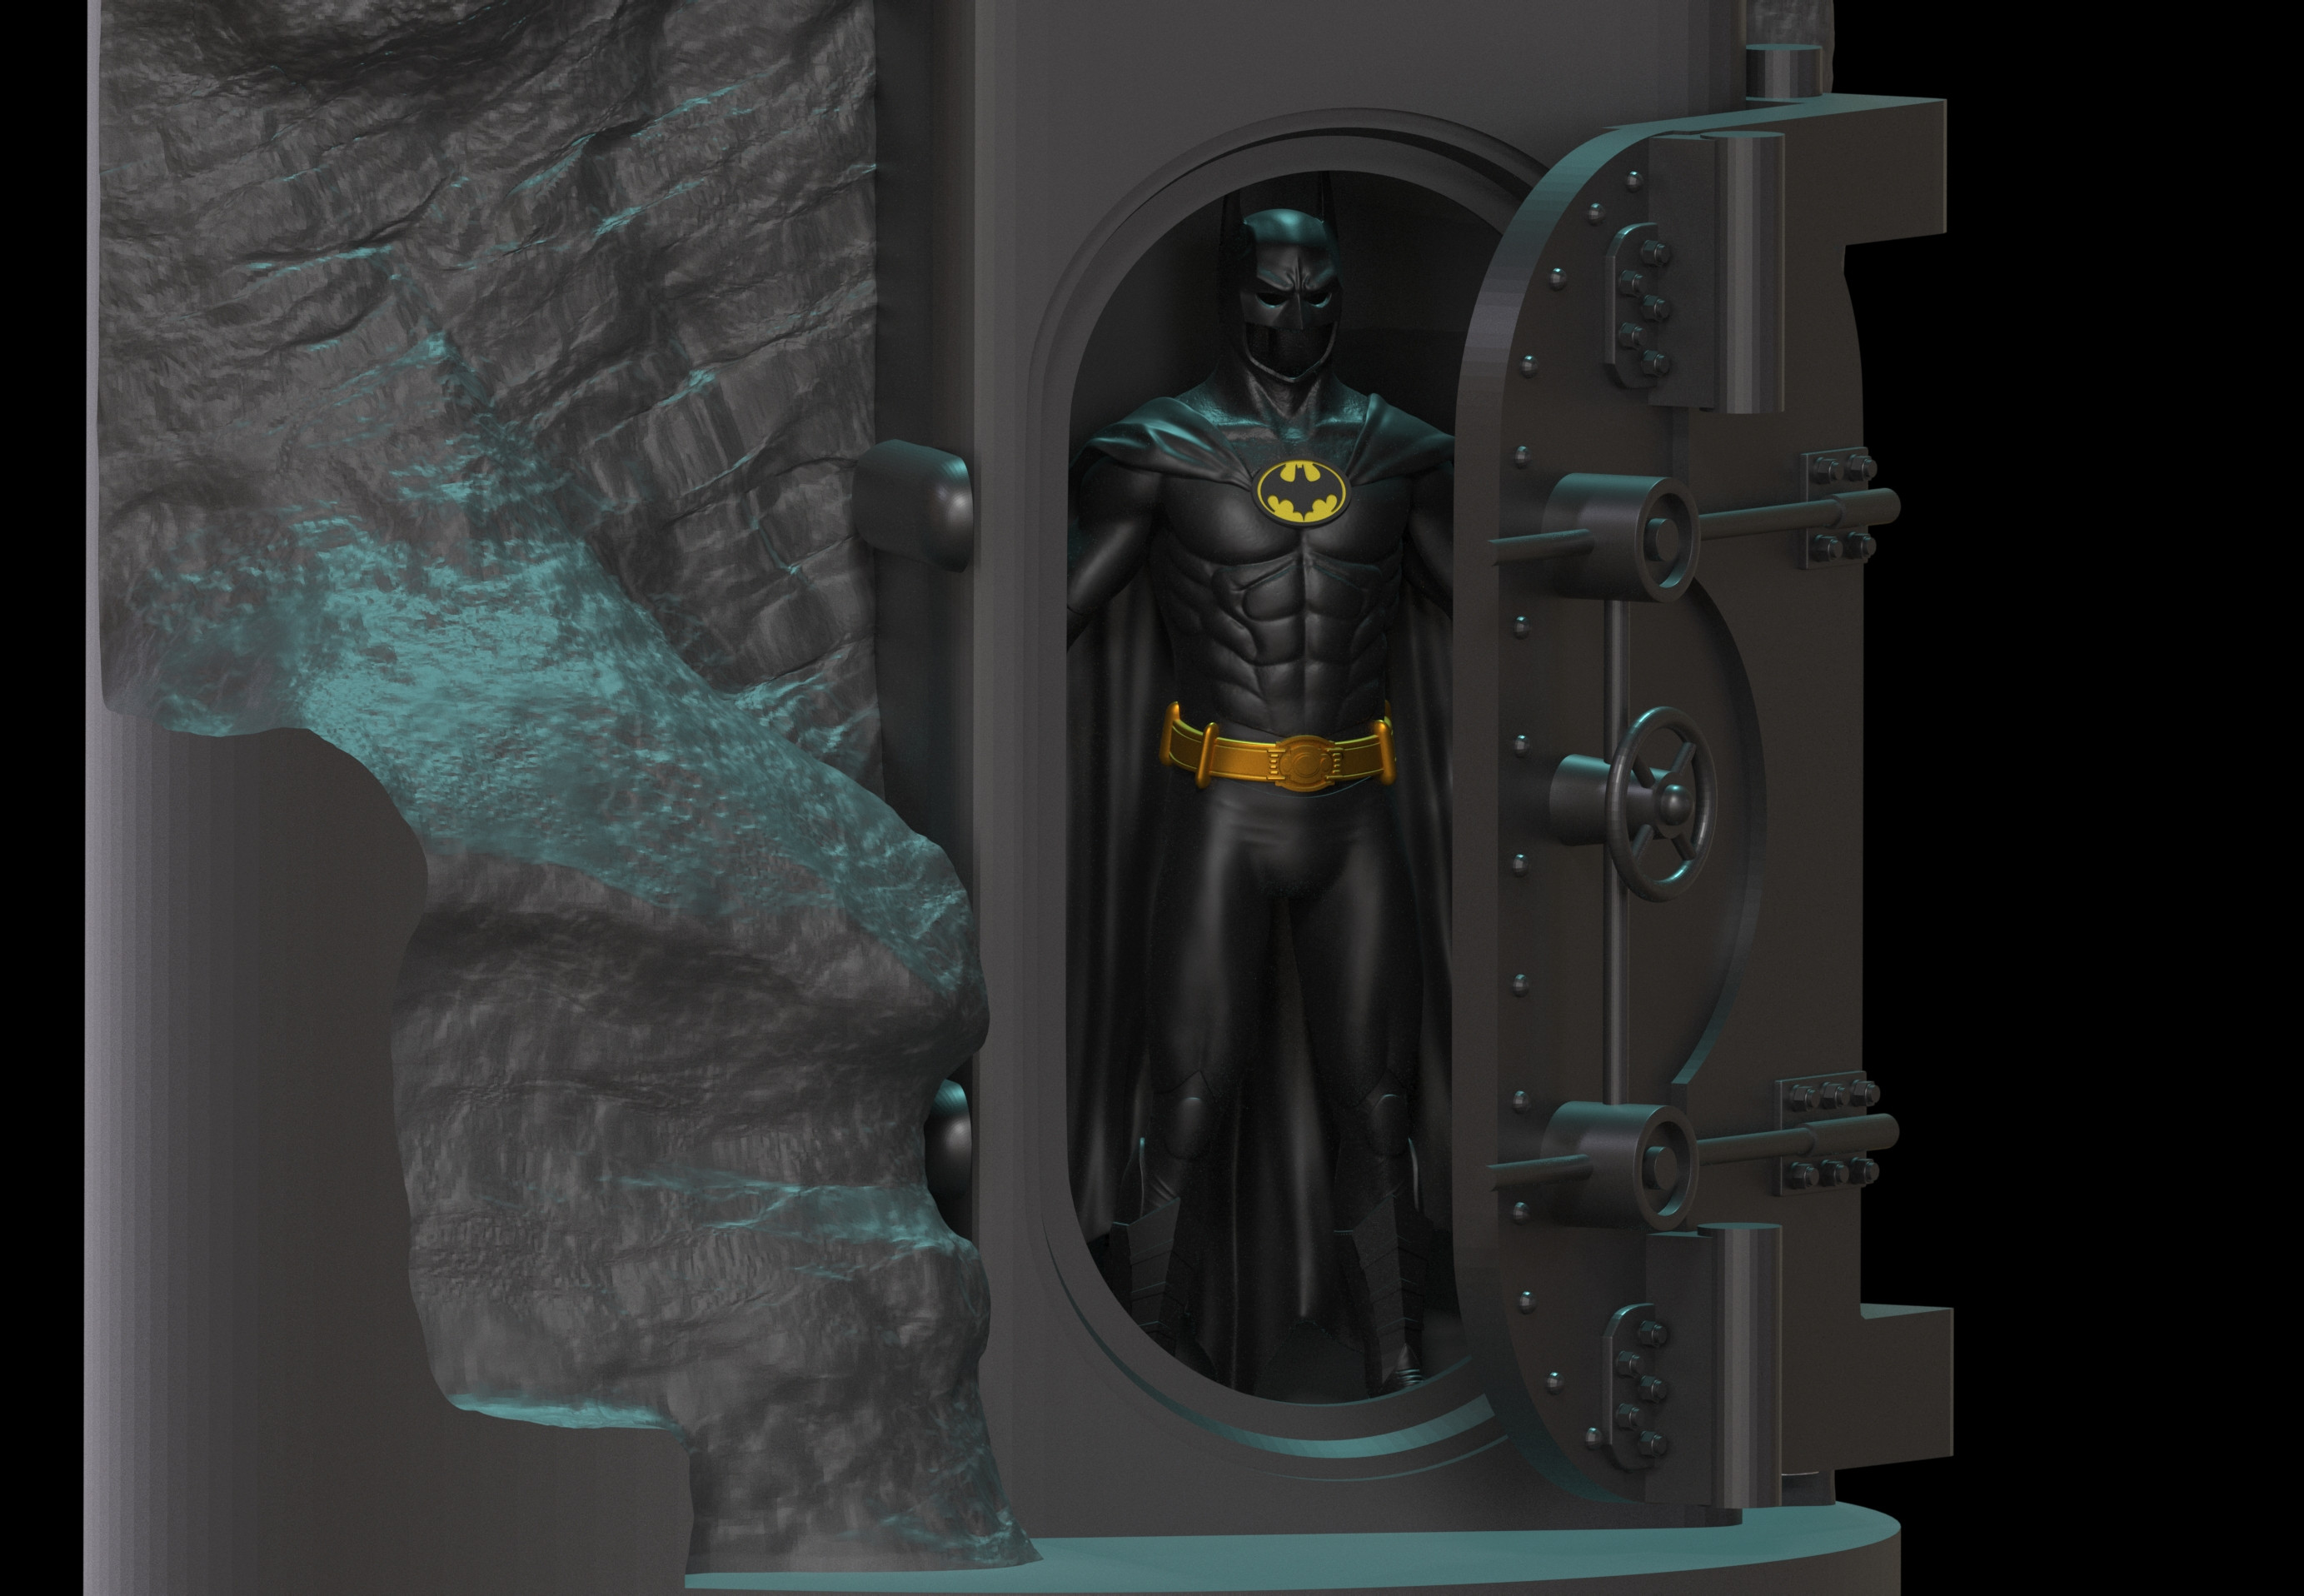 Sneak peek at the base and background that will complete this Batman's look!